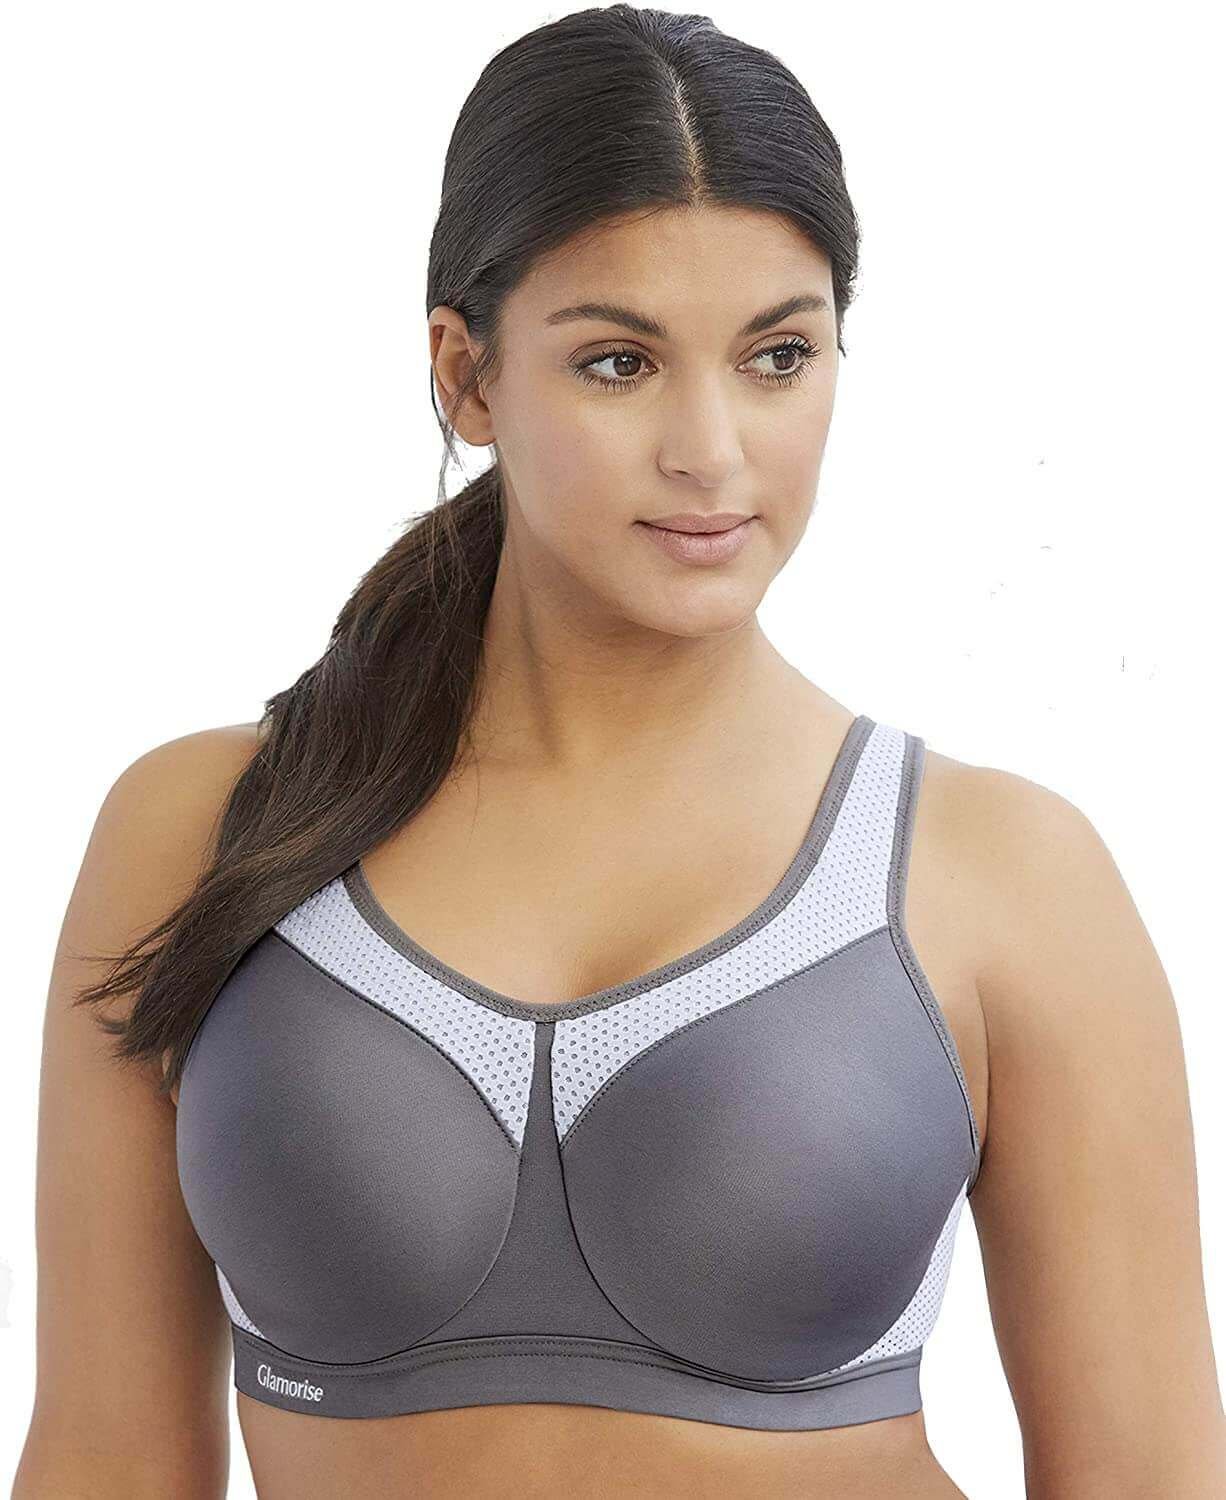 6 Best Sports Bra For Plus Size Breast Review 2020